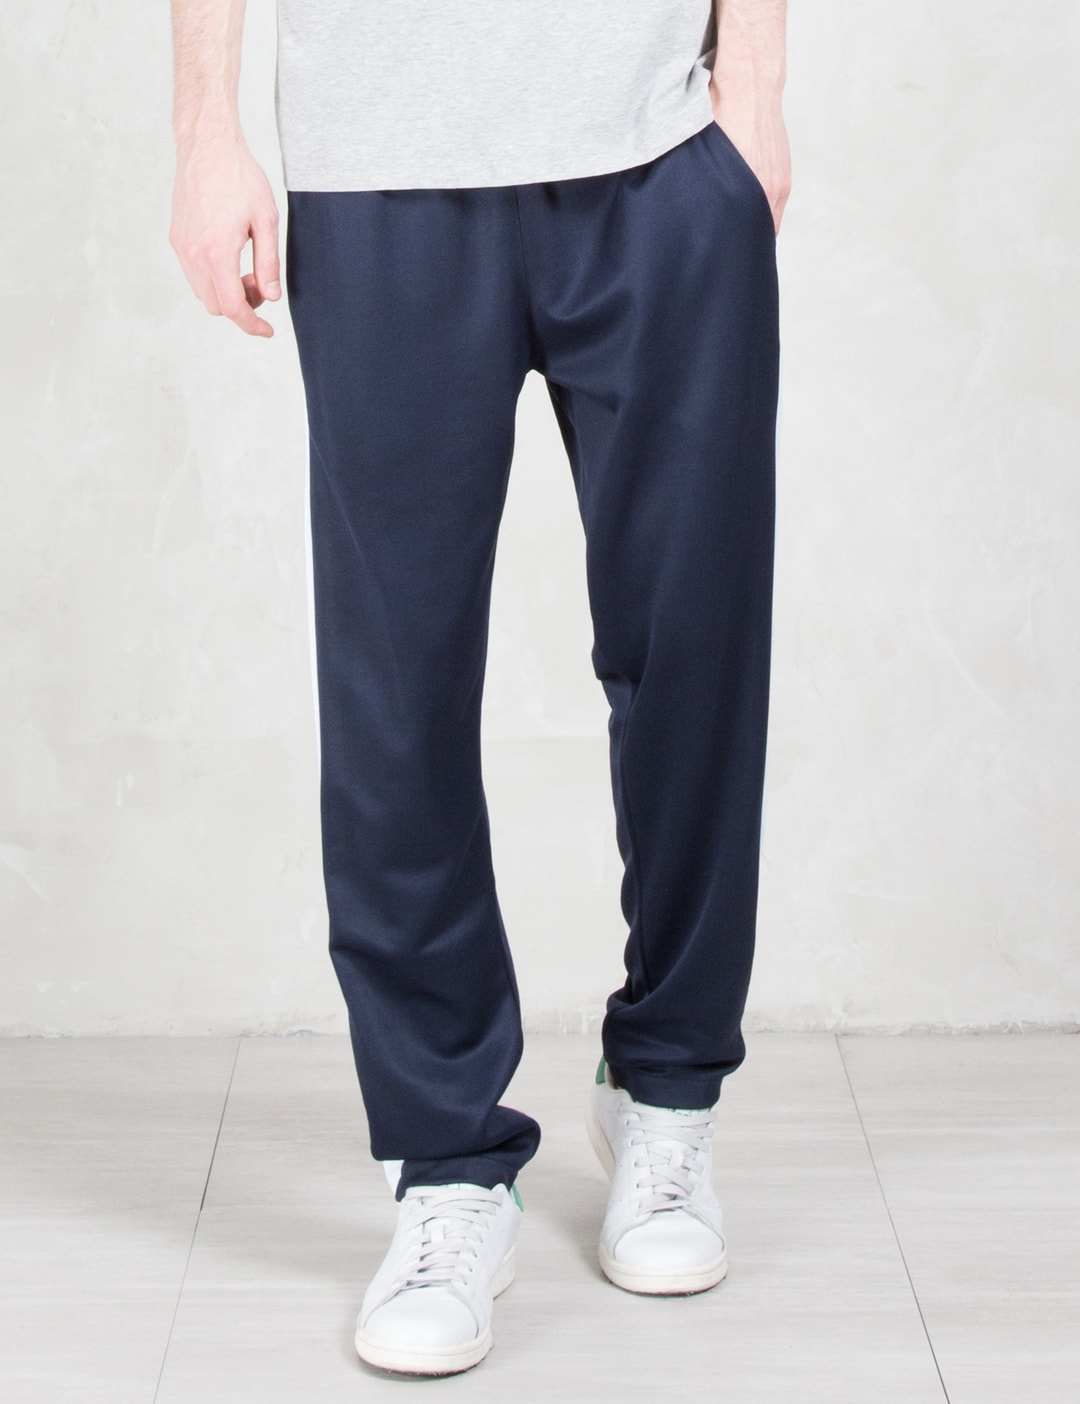 Ami - Jogging Pants | HBX - Globally Curated Fashion and Lifestyle by ...